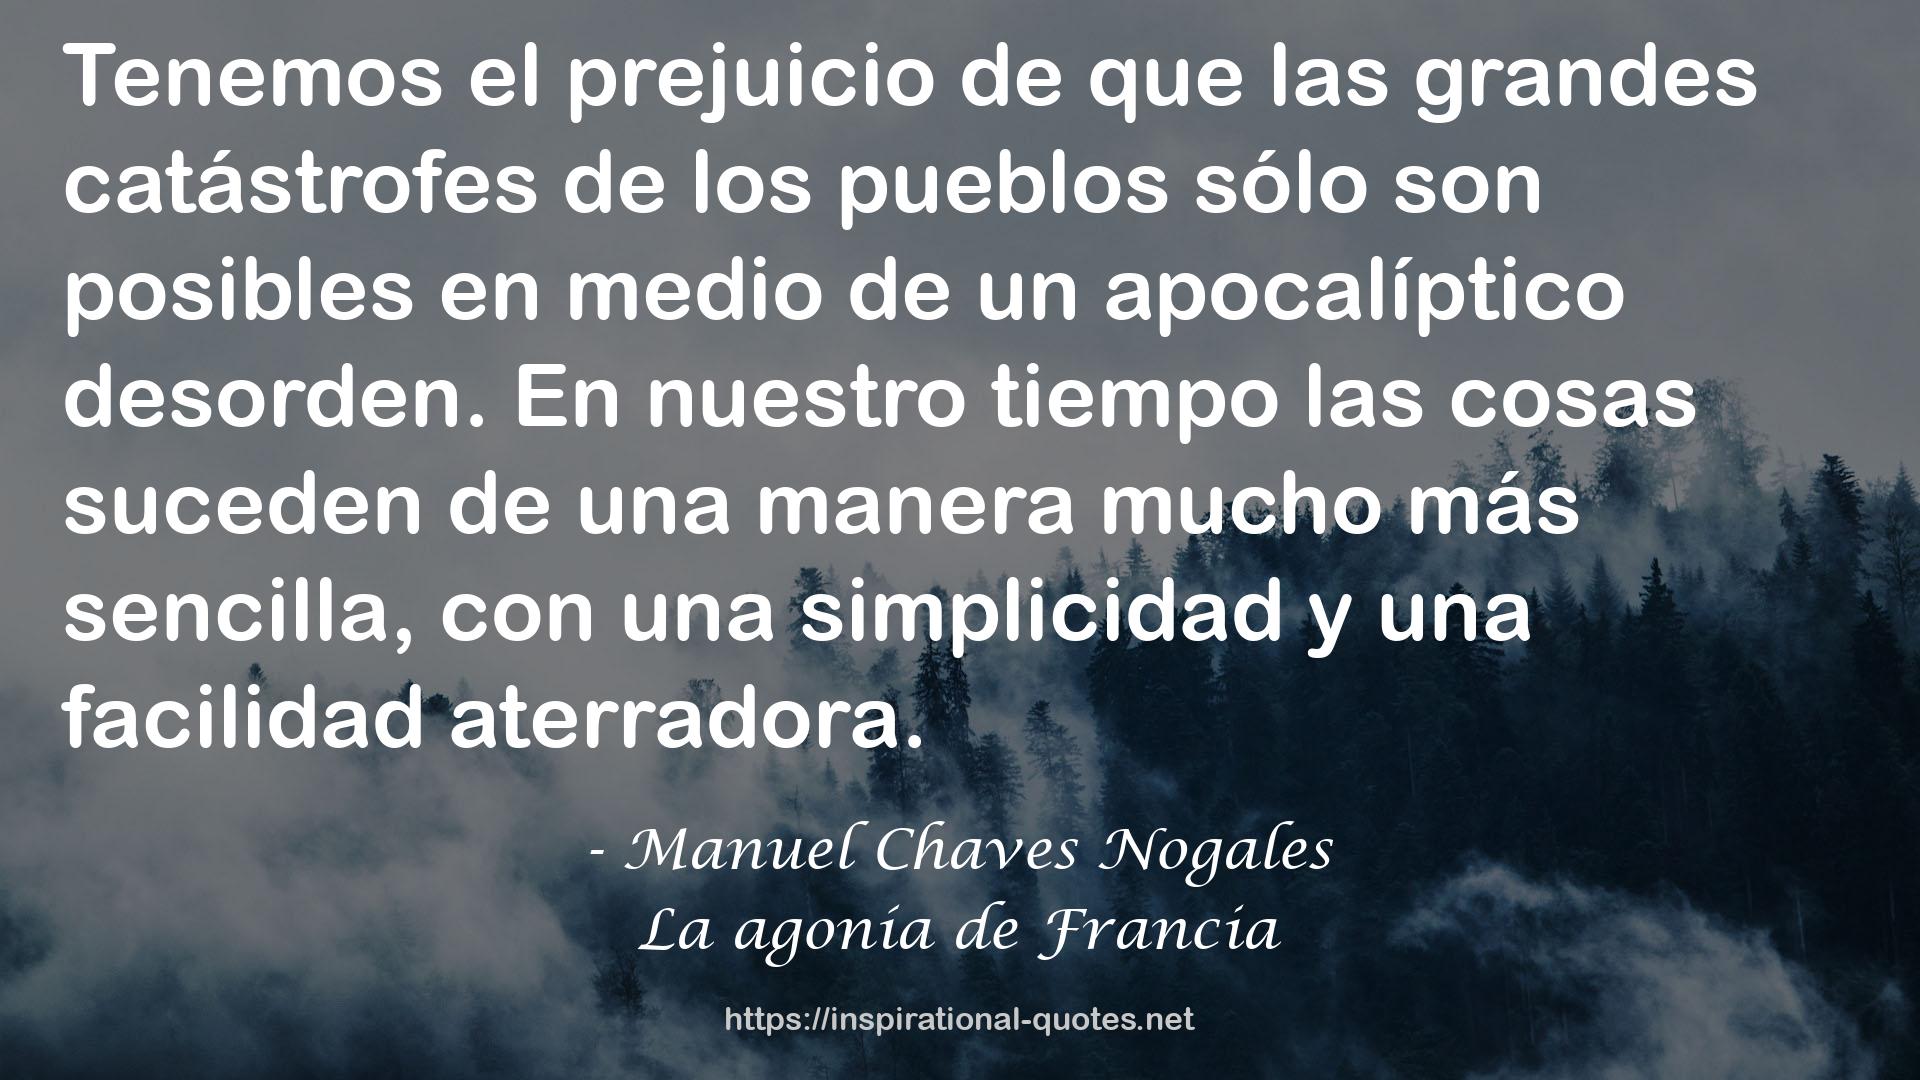 Manuel Chaves Nogales QUOTES